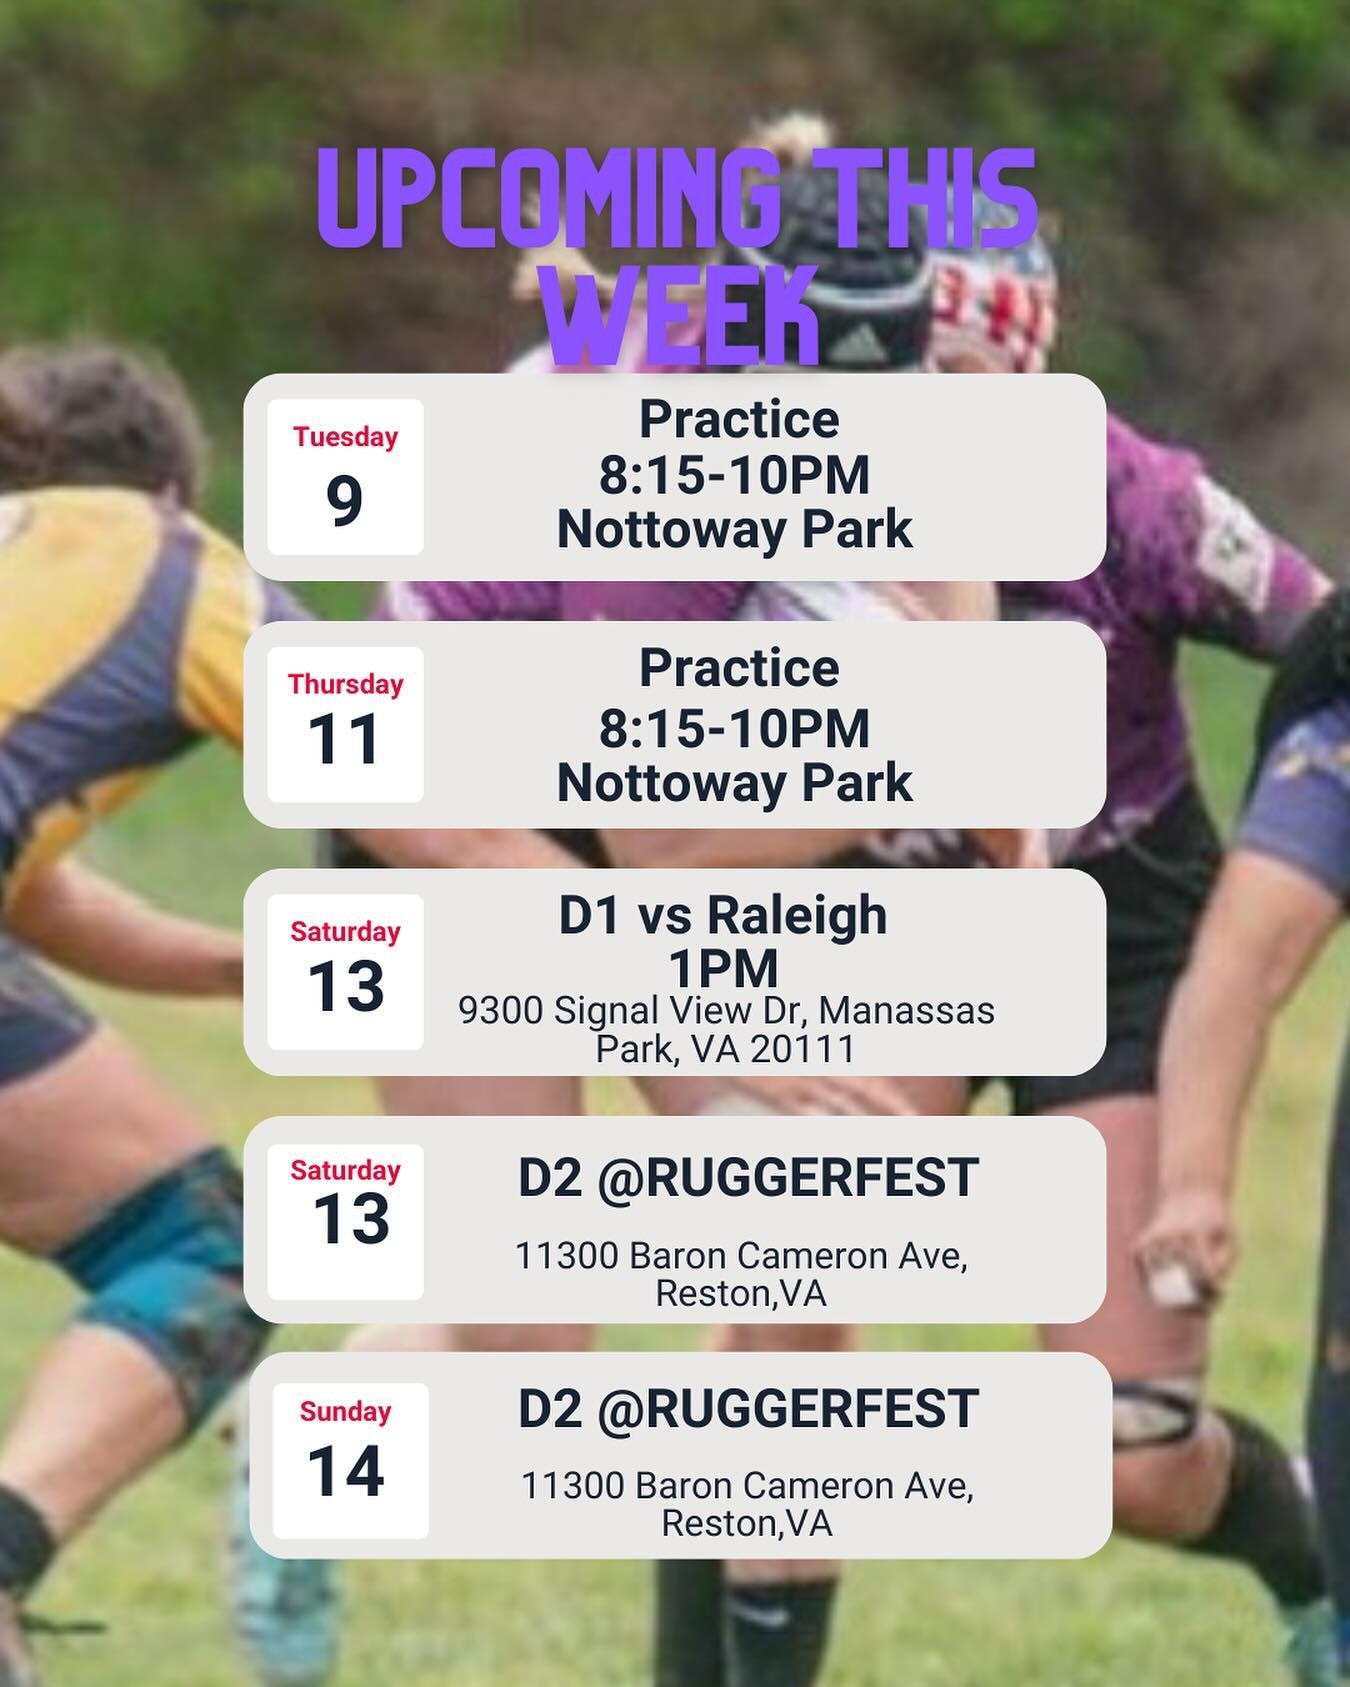 Busy week over here at NOVA

Looking forward for seeing @raleighrugbyclub over the weekend and having some fun at RUGGERFEST

Word on the street is our fav Caribbean team, @caymanrugby is making an appearance this weekend too!

It&rsquo;s a good week